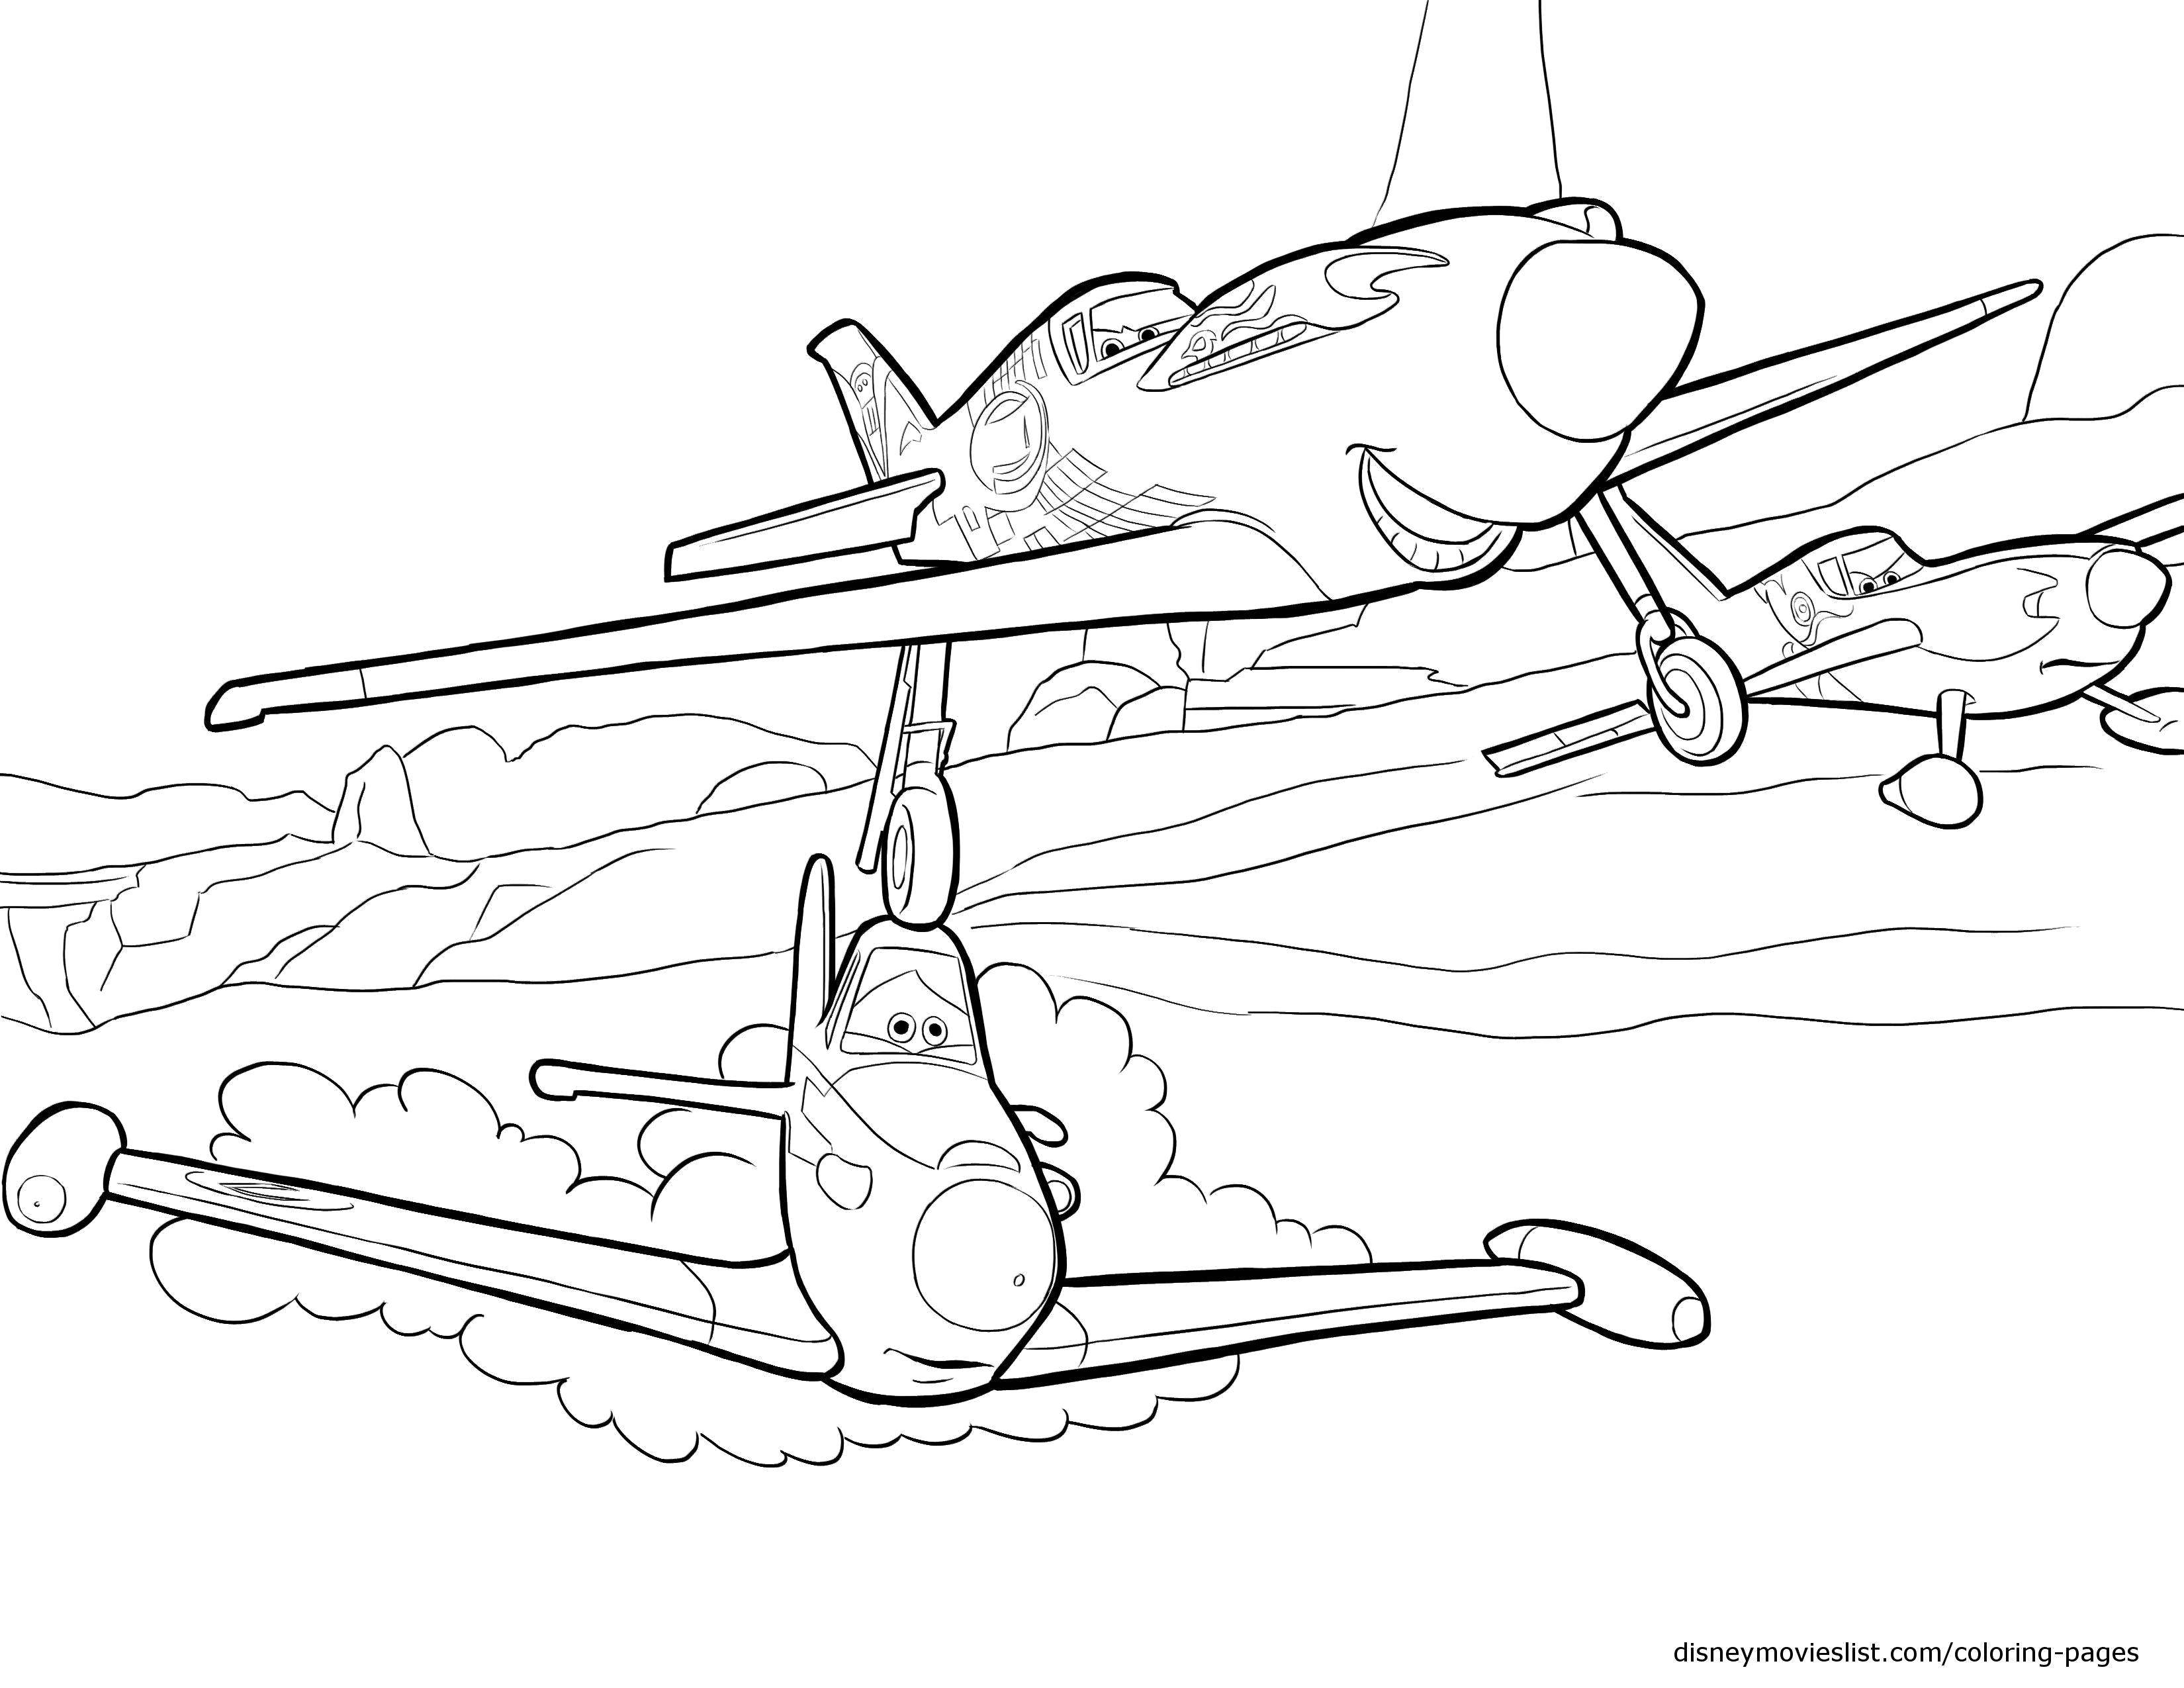 Coloring Airplanes. Category The planes. Tags:  Cartoon character.